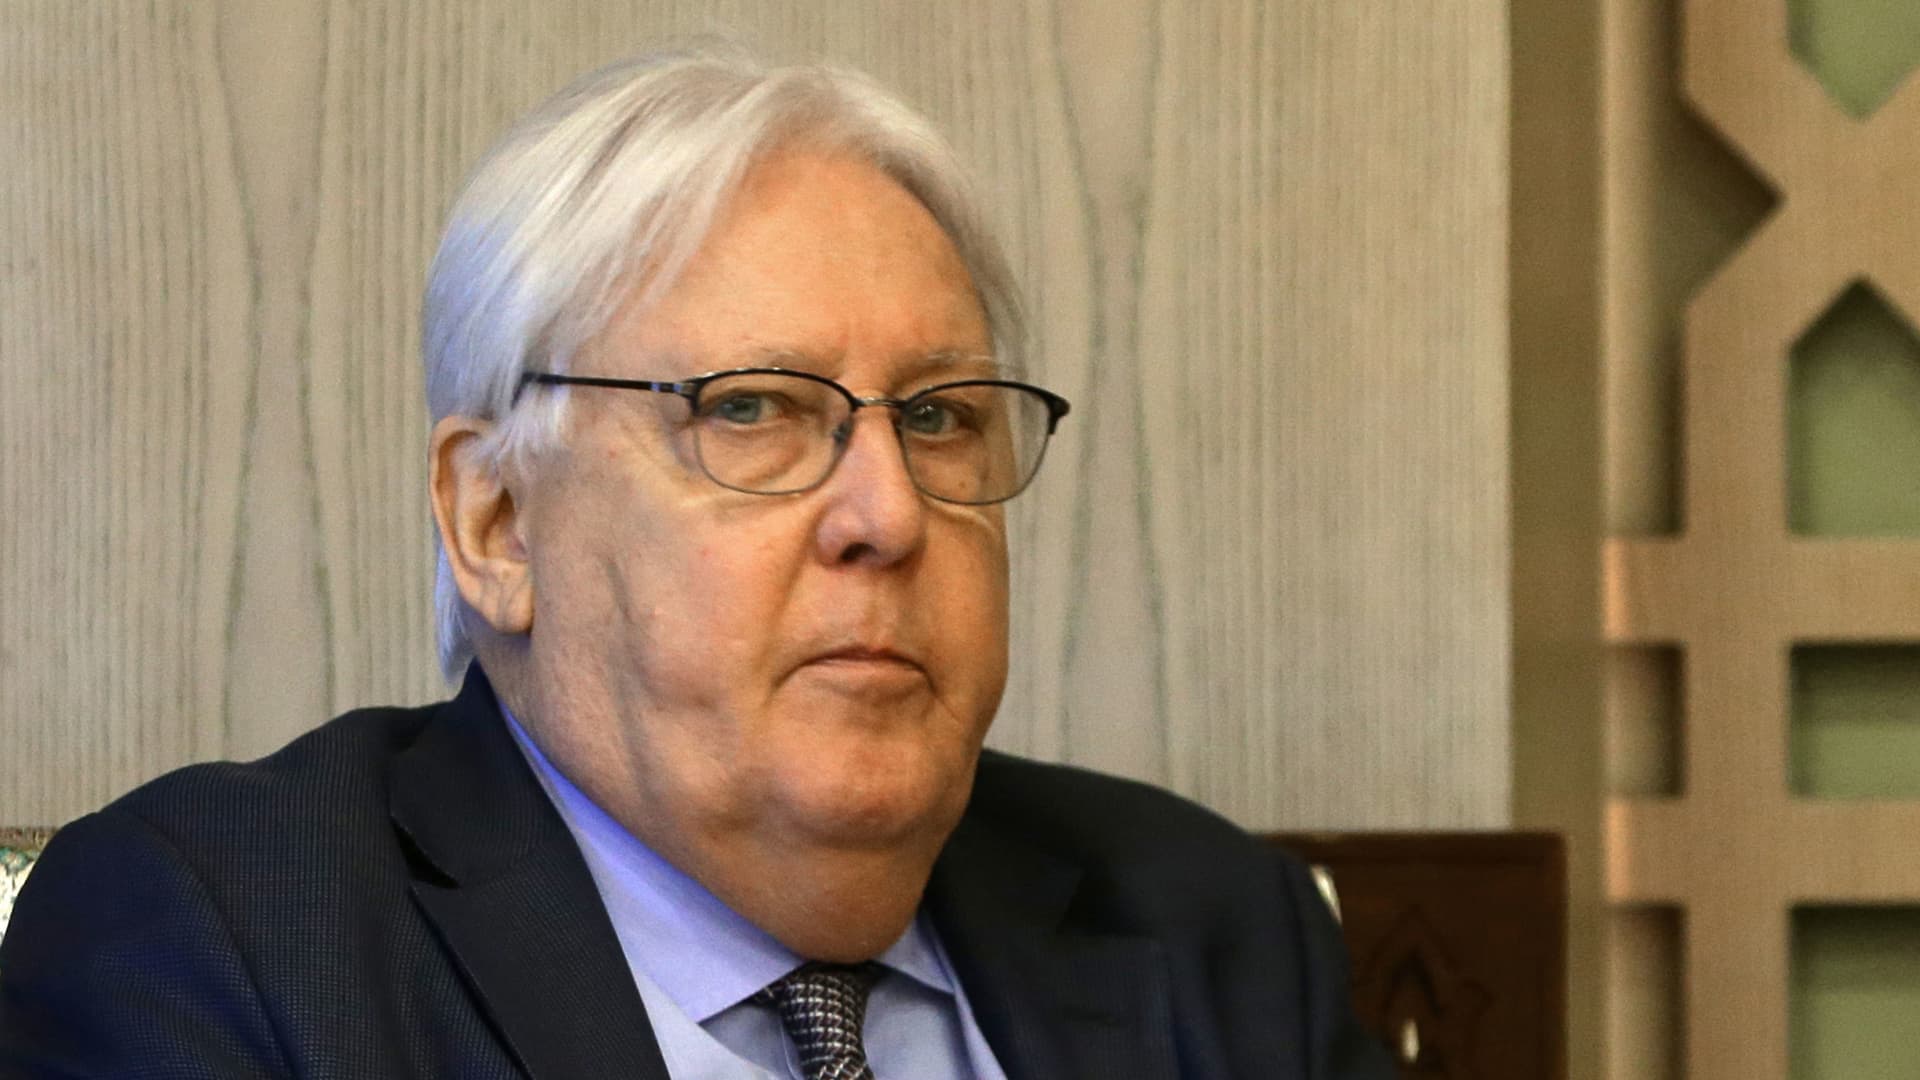 UN Under-Secretary-General for Humanitarian Affairs and Emergency Relief Coordinator, Martin Griffiths, meets with the Syrian foreign minister in Damascus on June 26, 2023. (Photo by LOUAI BESHARA / AFP) (Photo by LOUAI BESHARA/AFP via Getty Images)